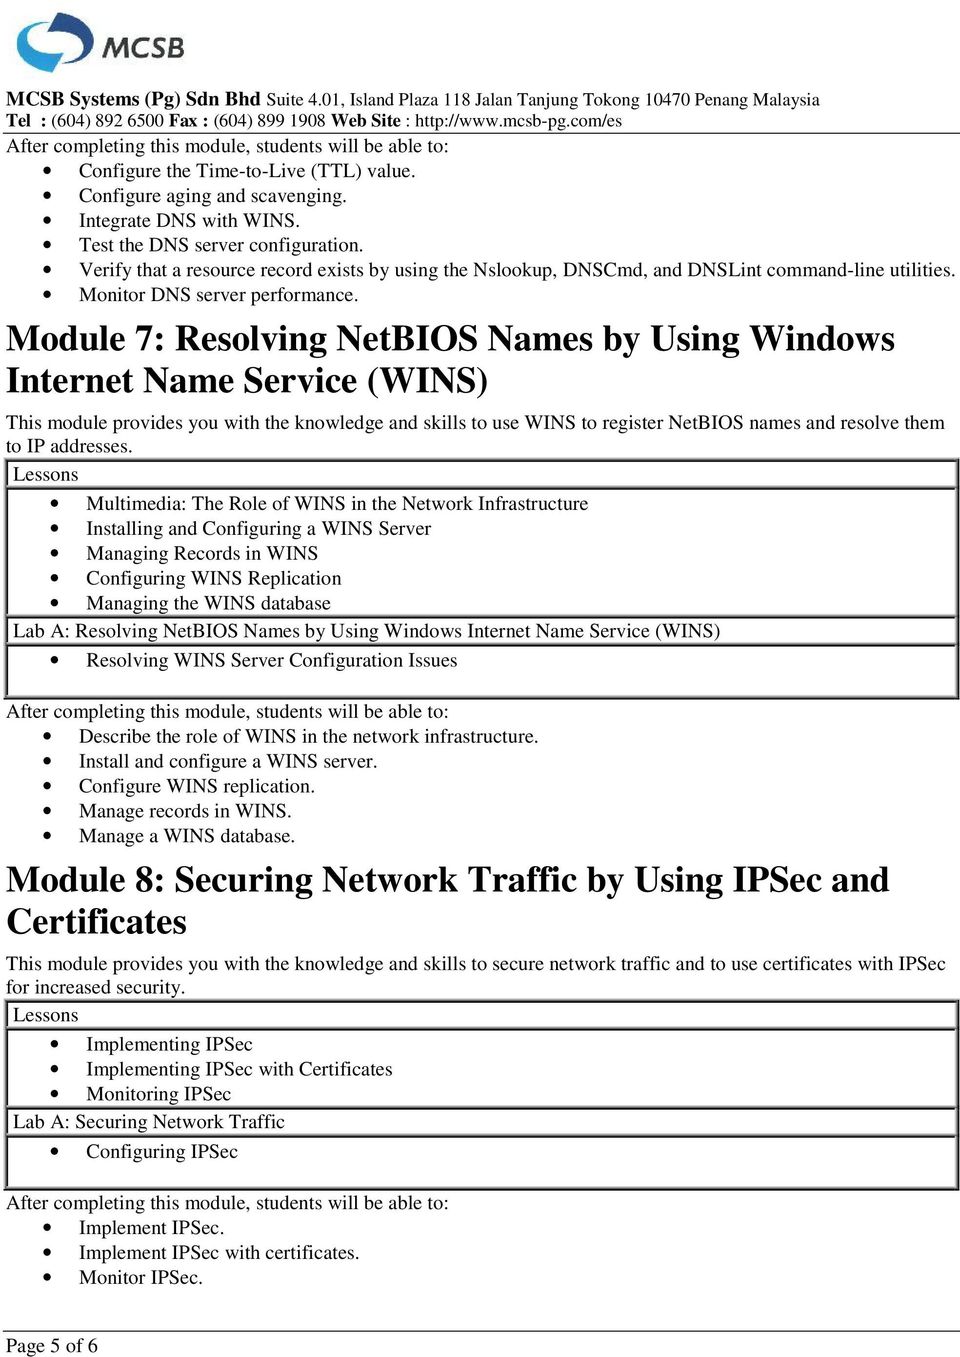 Module 7: Resolving NetBIOS Names by Using Windows Internet Name Service (WINS) This module provides you with the knowledge and skills to use WINS to register NetBIOS names and resolve them to IP